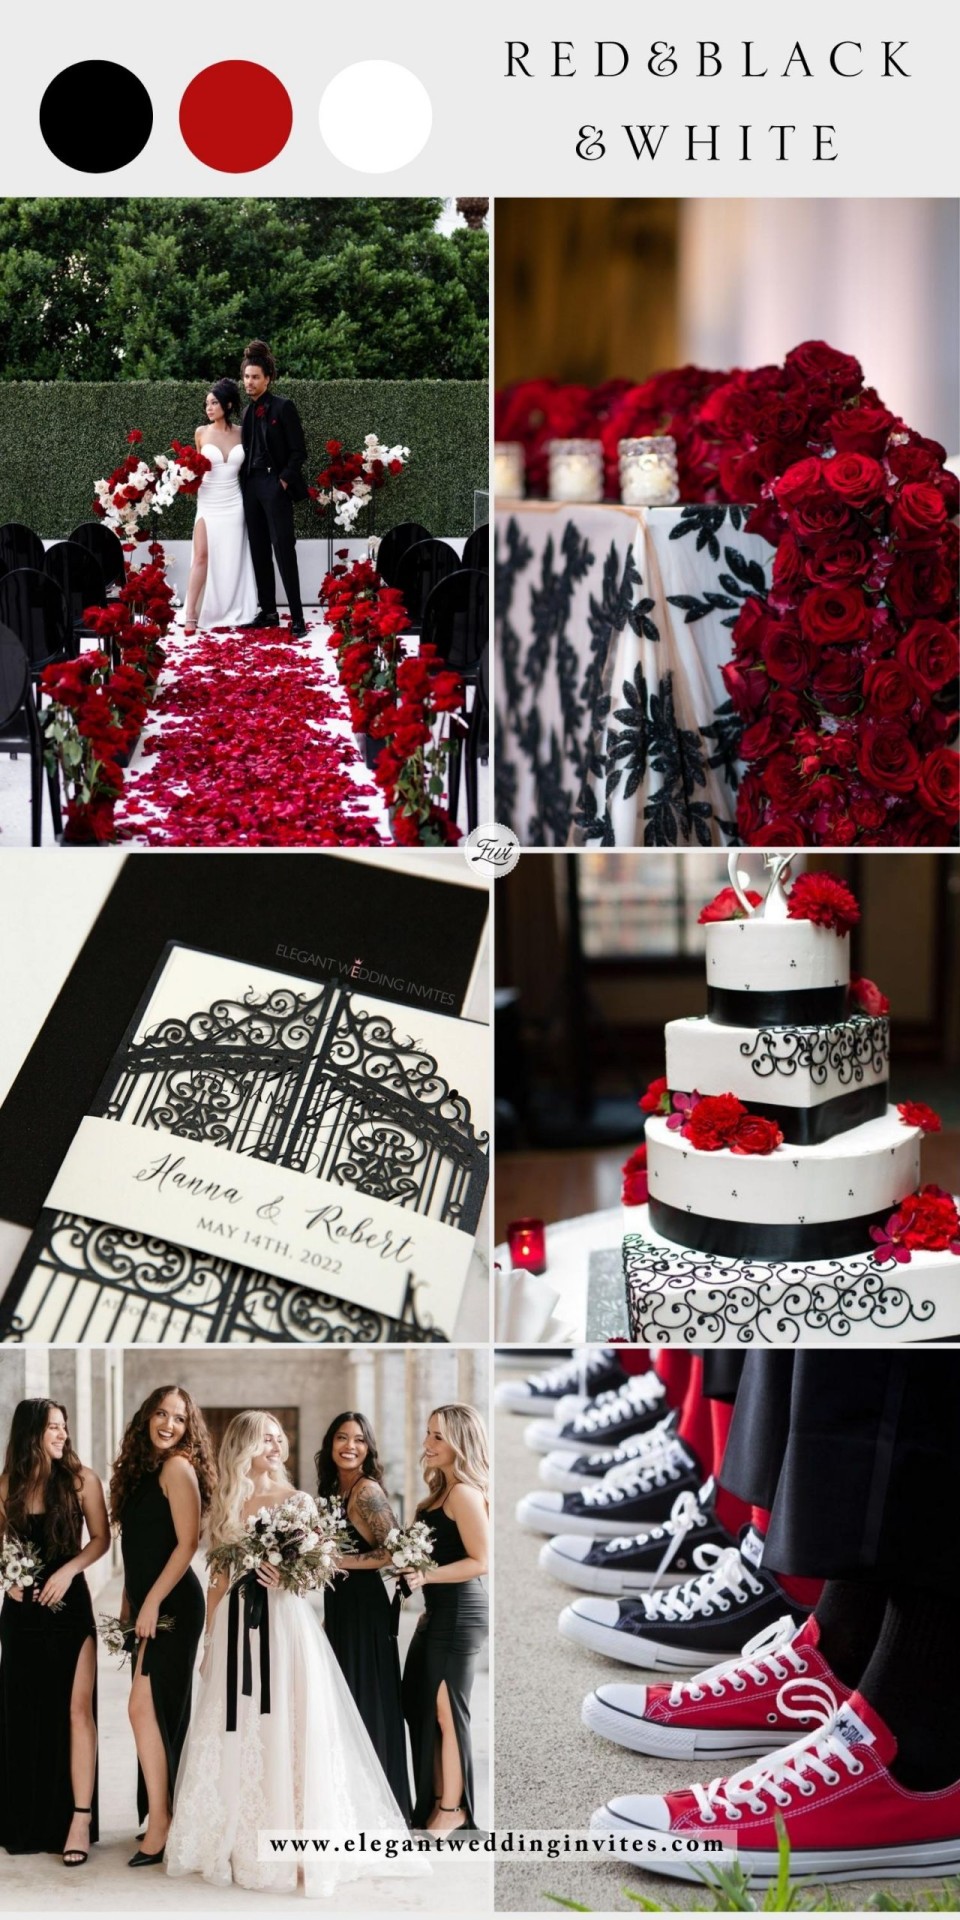 Gorgeous Red & Black Wedding Color Ideas For Fall or Winter